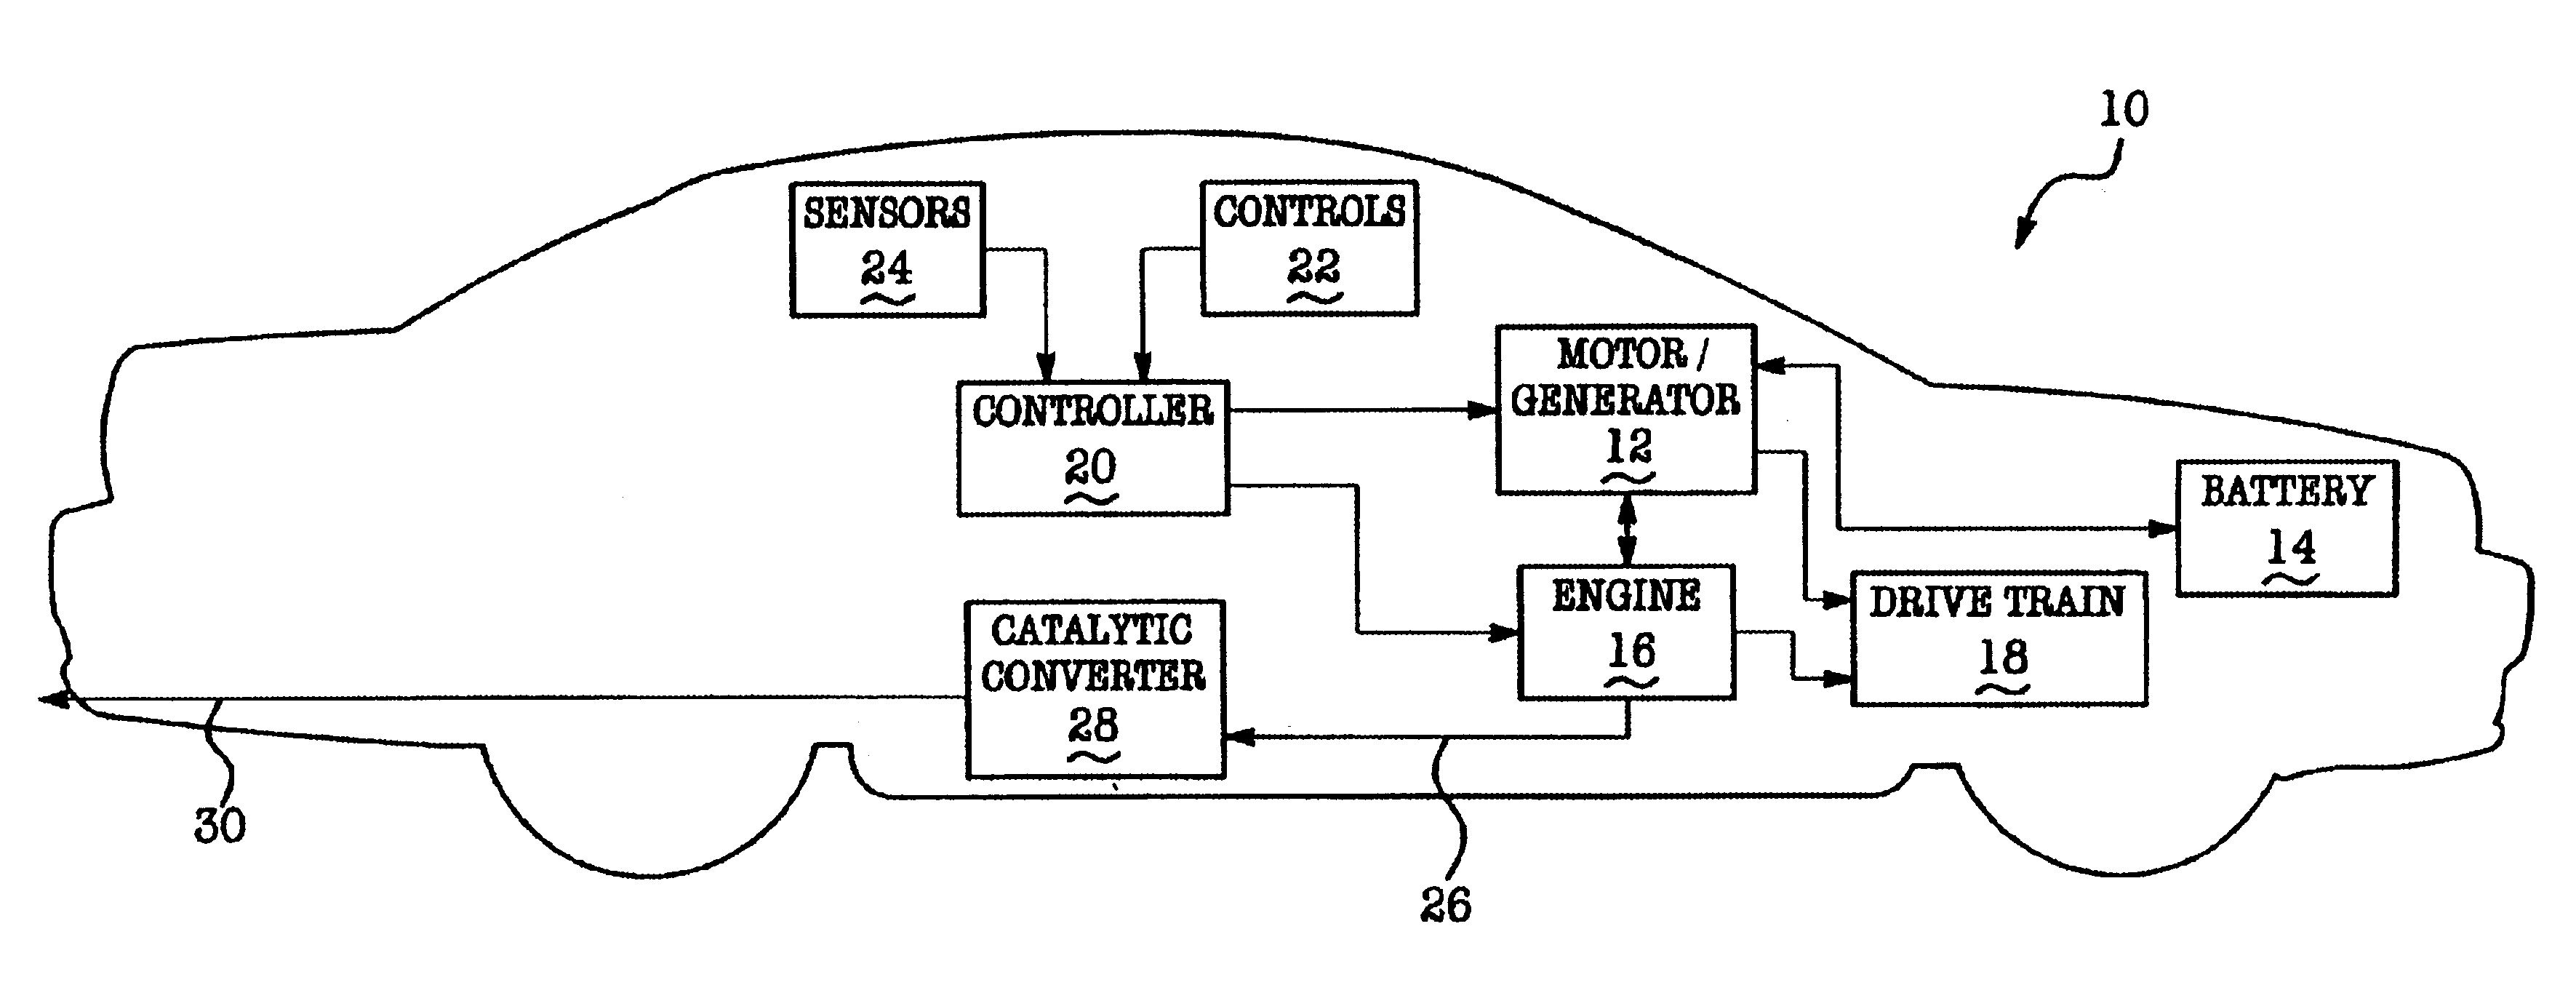 Method of operating a hybrid electric vehicle to reduce emissions